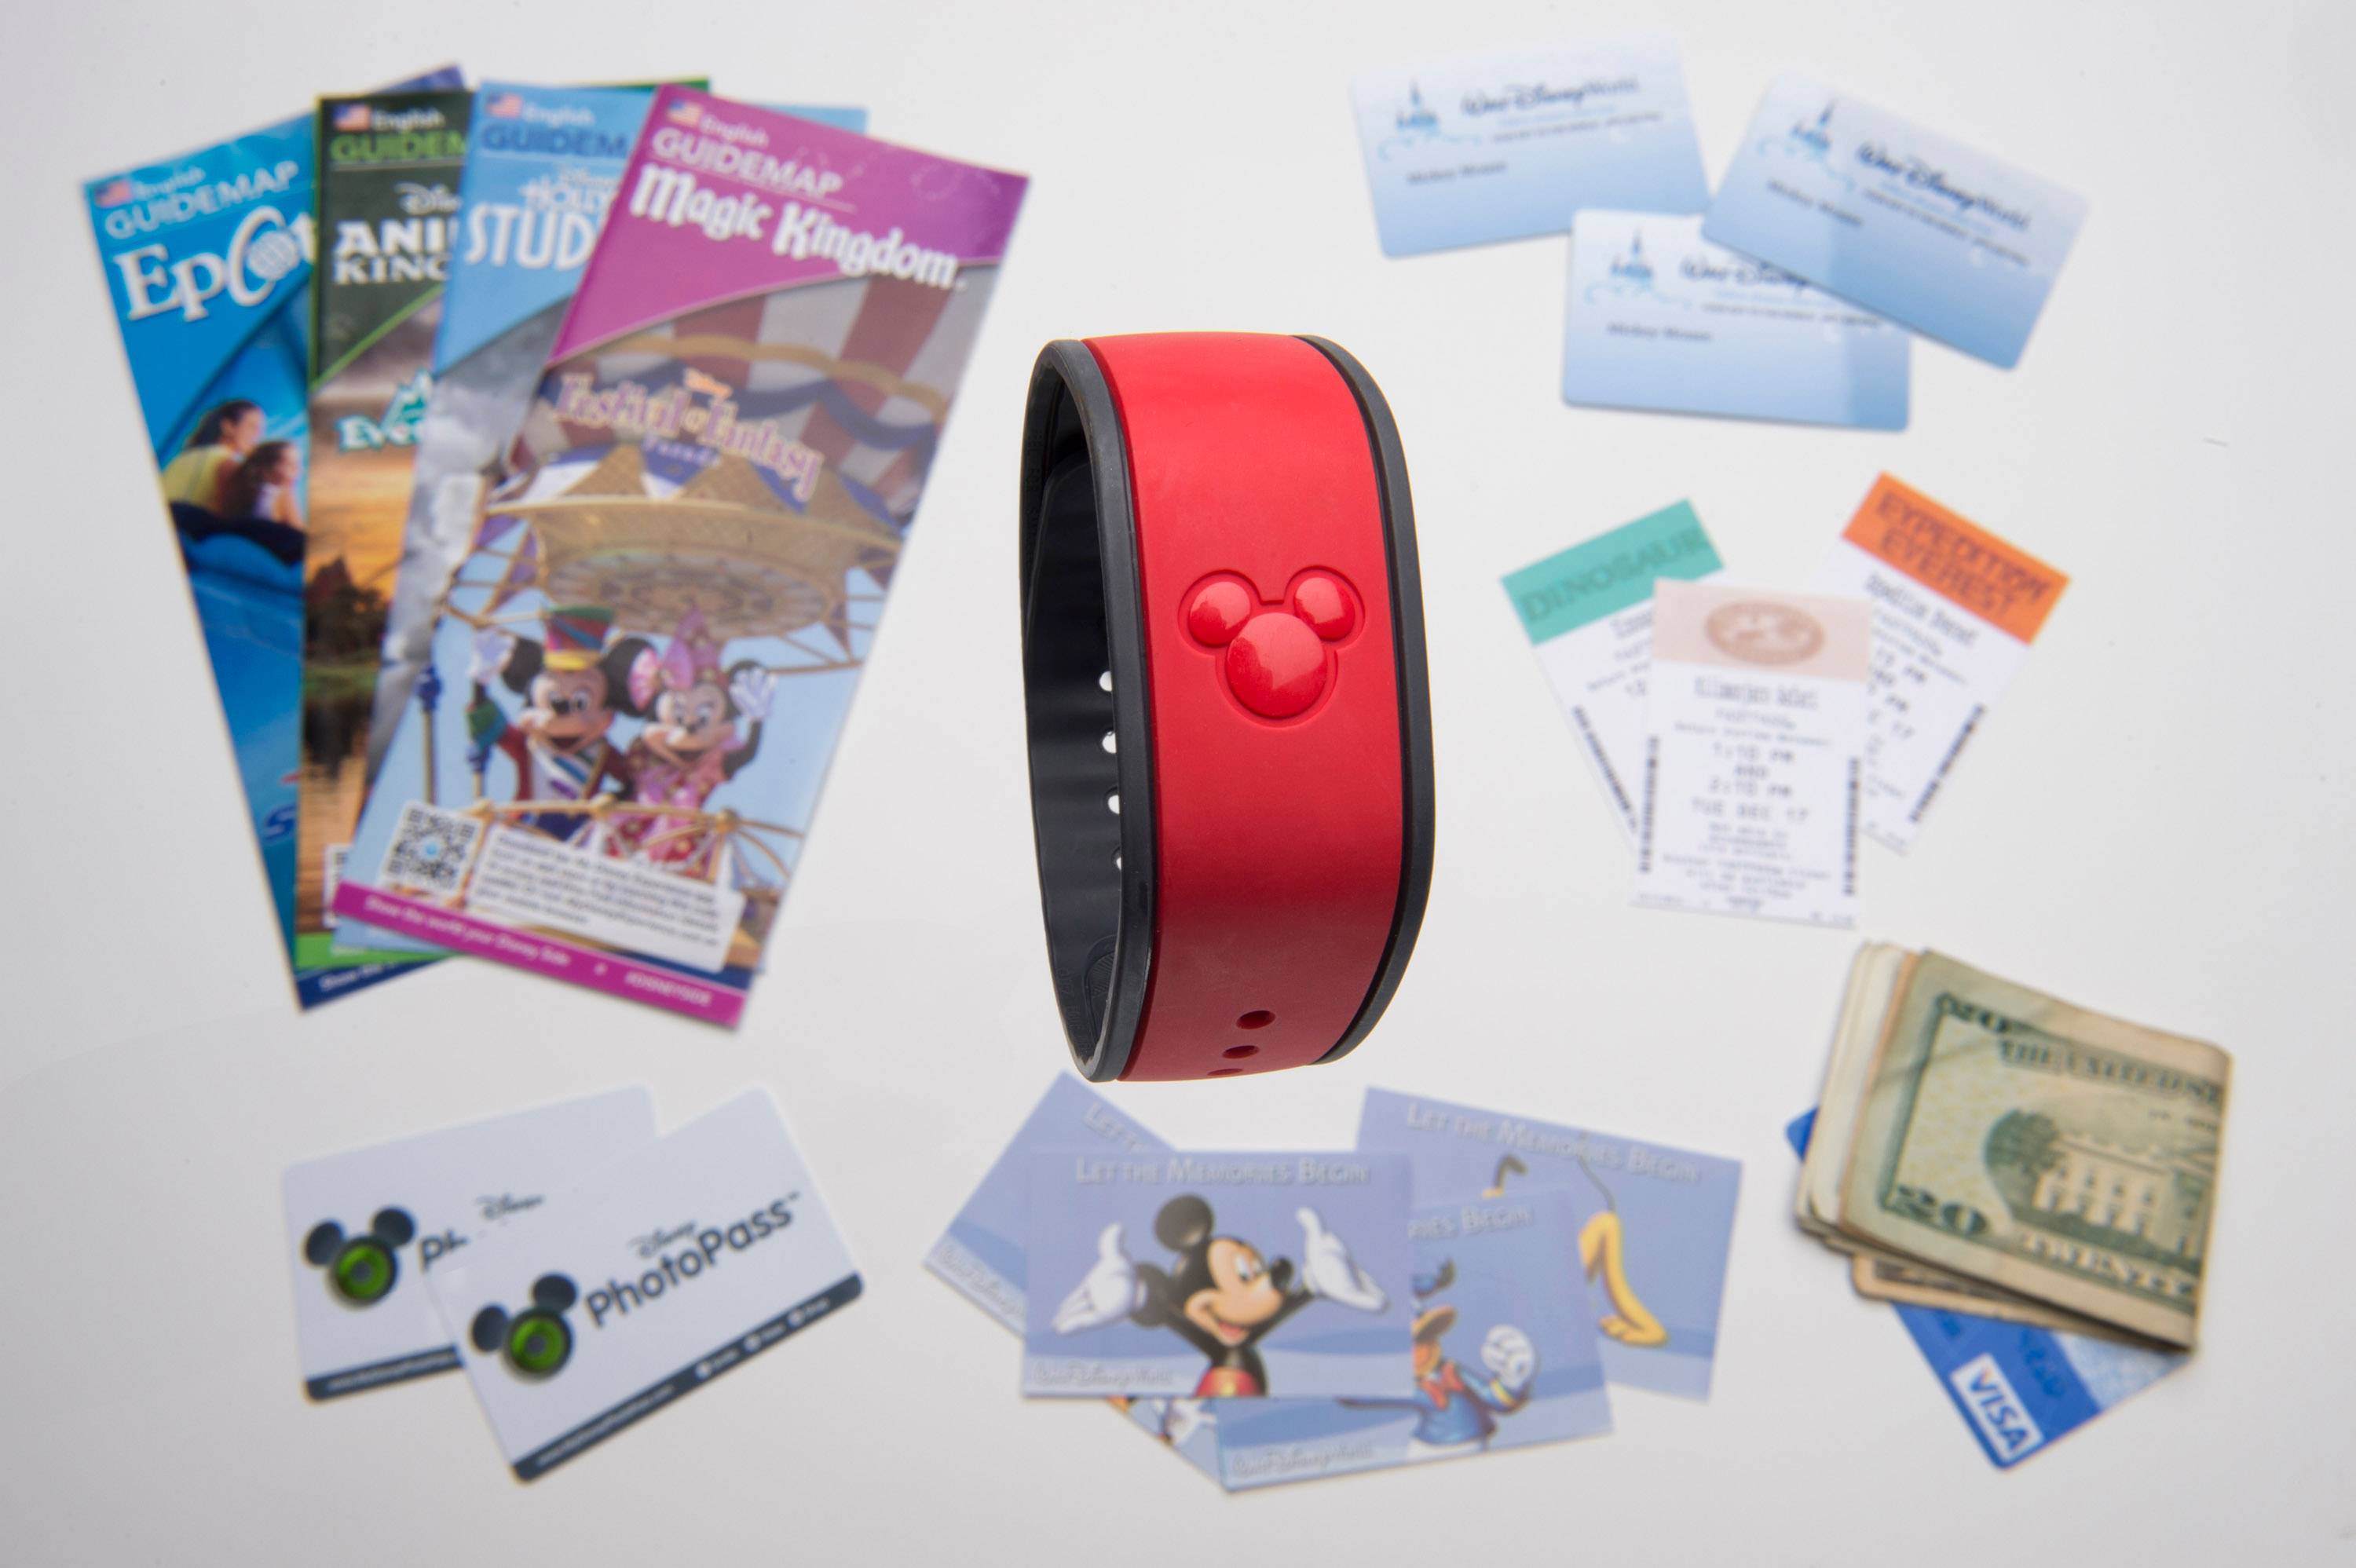 Disney surveying guests about big changes to its PhotoPass Memory Maker product